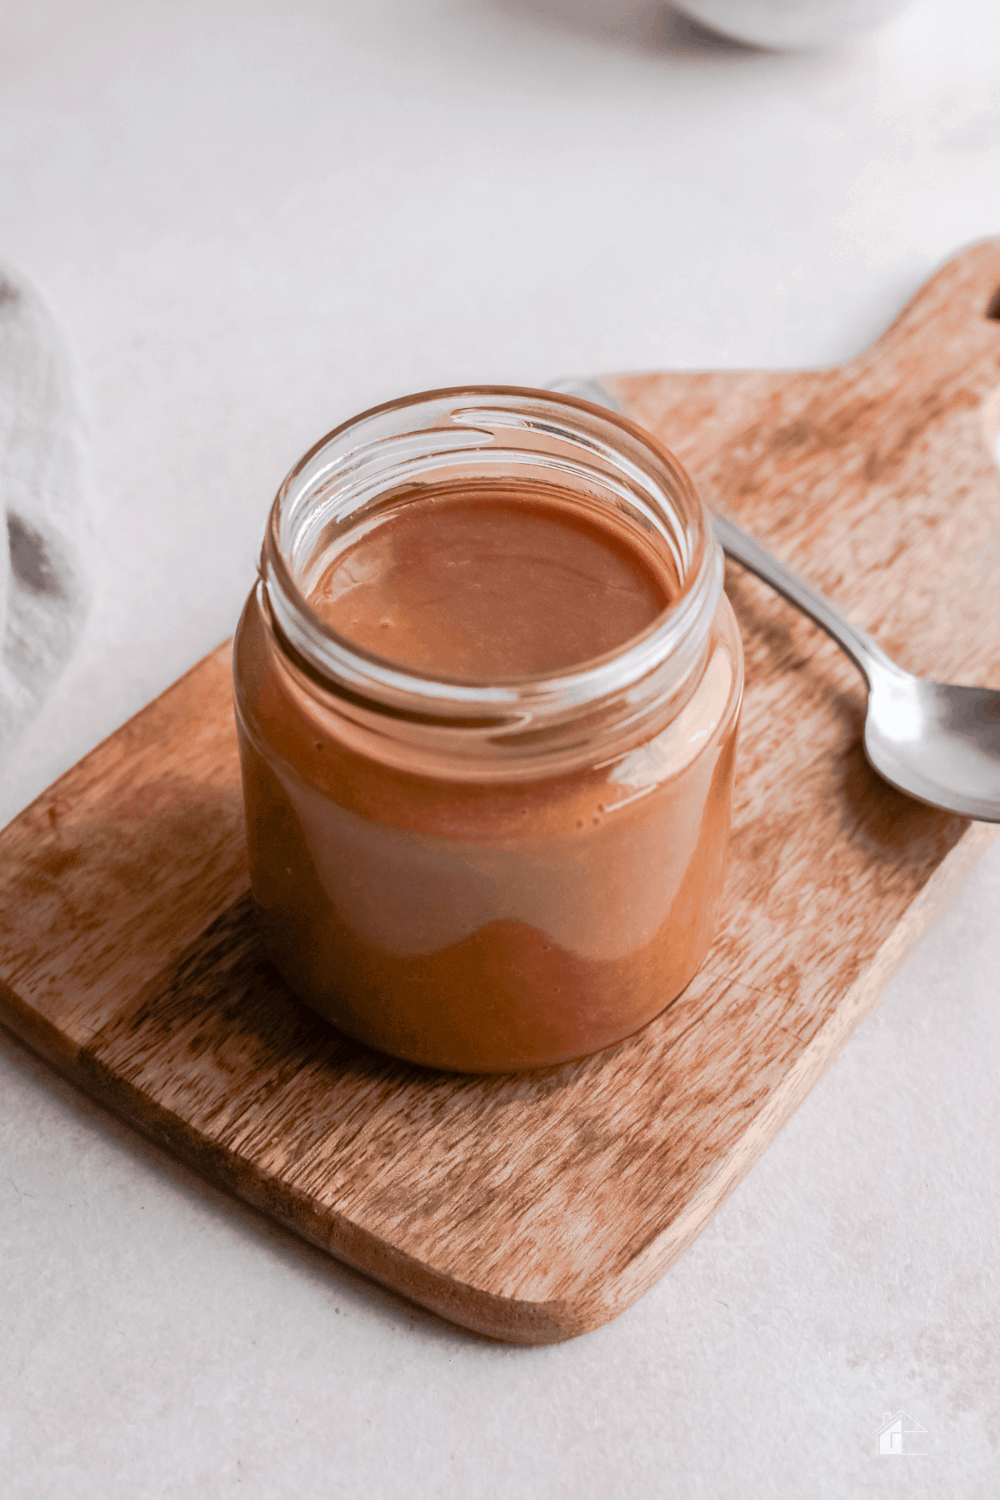 It’s sweet, creamy, and so delicious with a butterscotch-like flavor. This delightful Dulce de Leche can be a spread, fillings, toppings, or dip. via @mystayathome